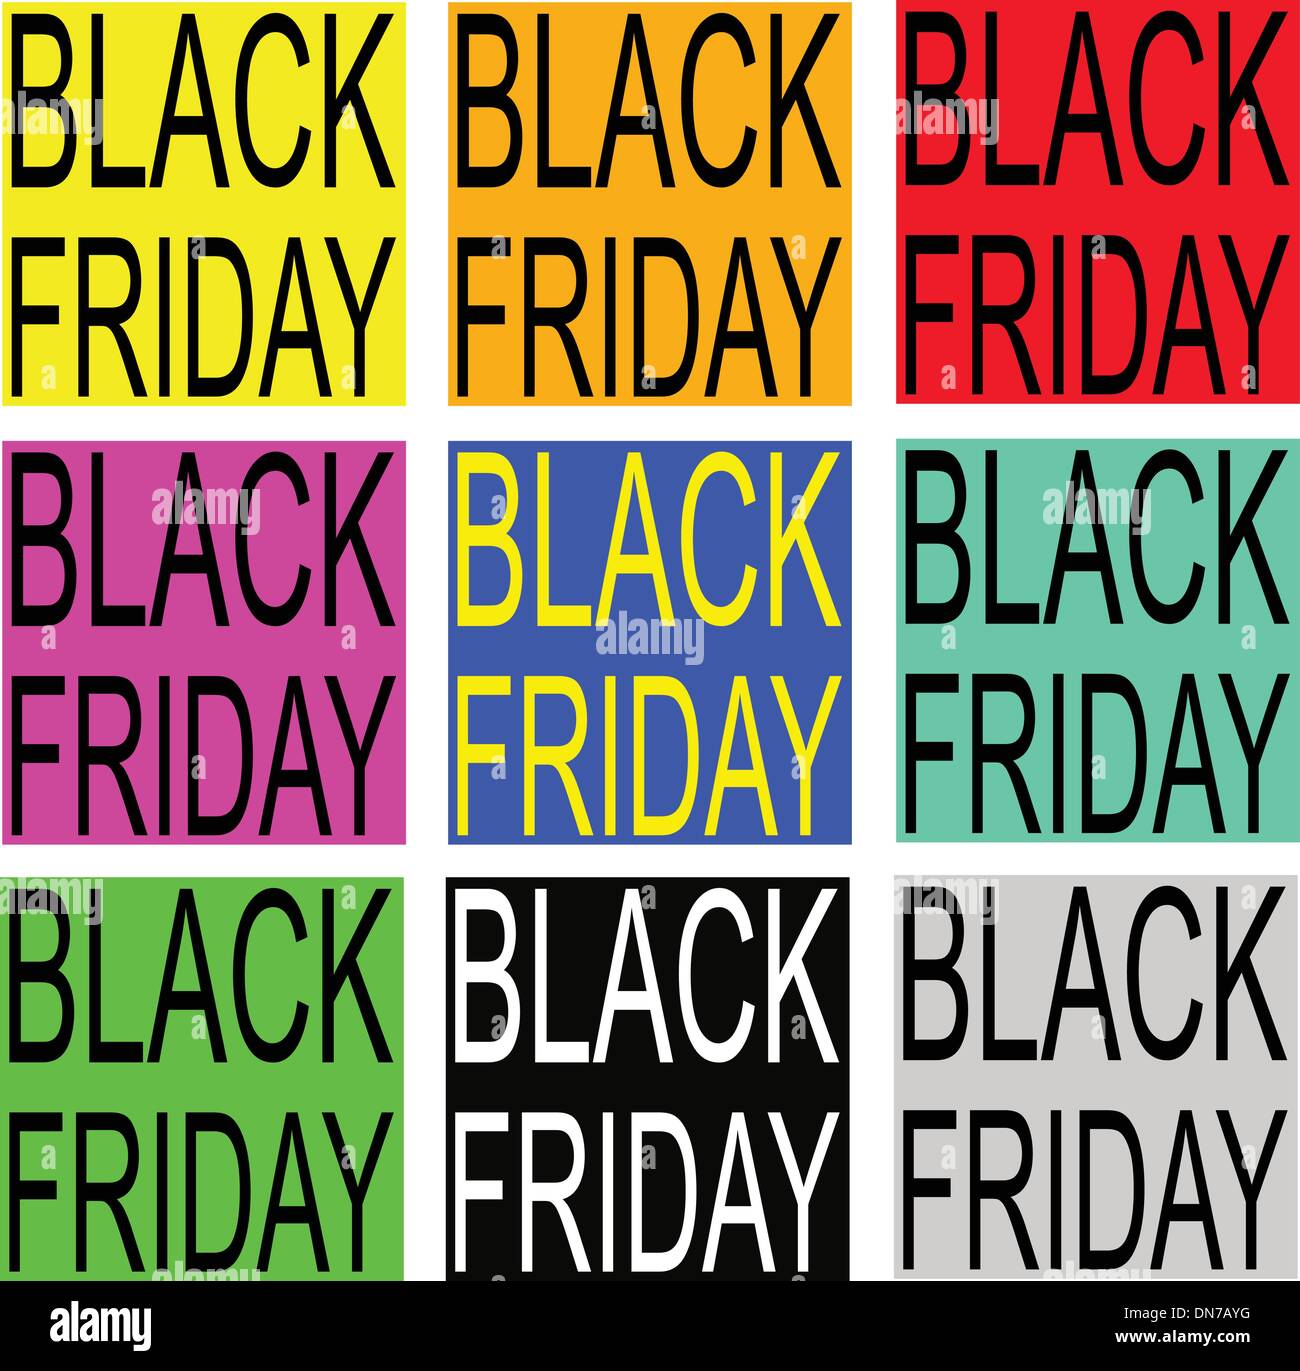 Black Friday on Colorful Banner for Special Price Products Stock Vector